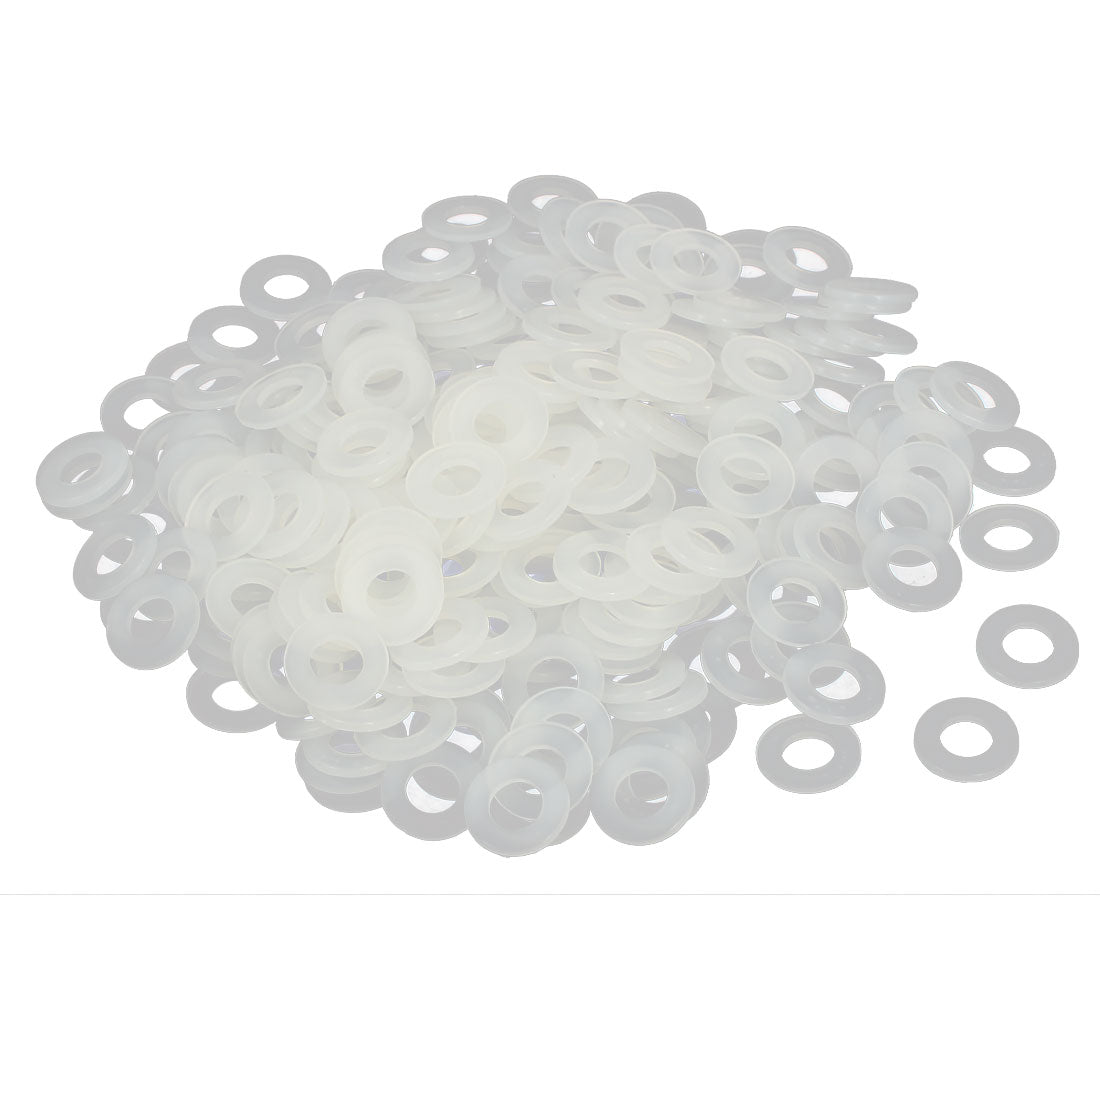 Uxcell Uxcell M5 x 10mm x 1mm Nylon Flat Insulating Washers Gaskets Spacers Grey White 300PCS